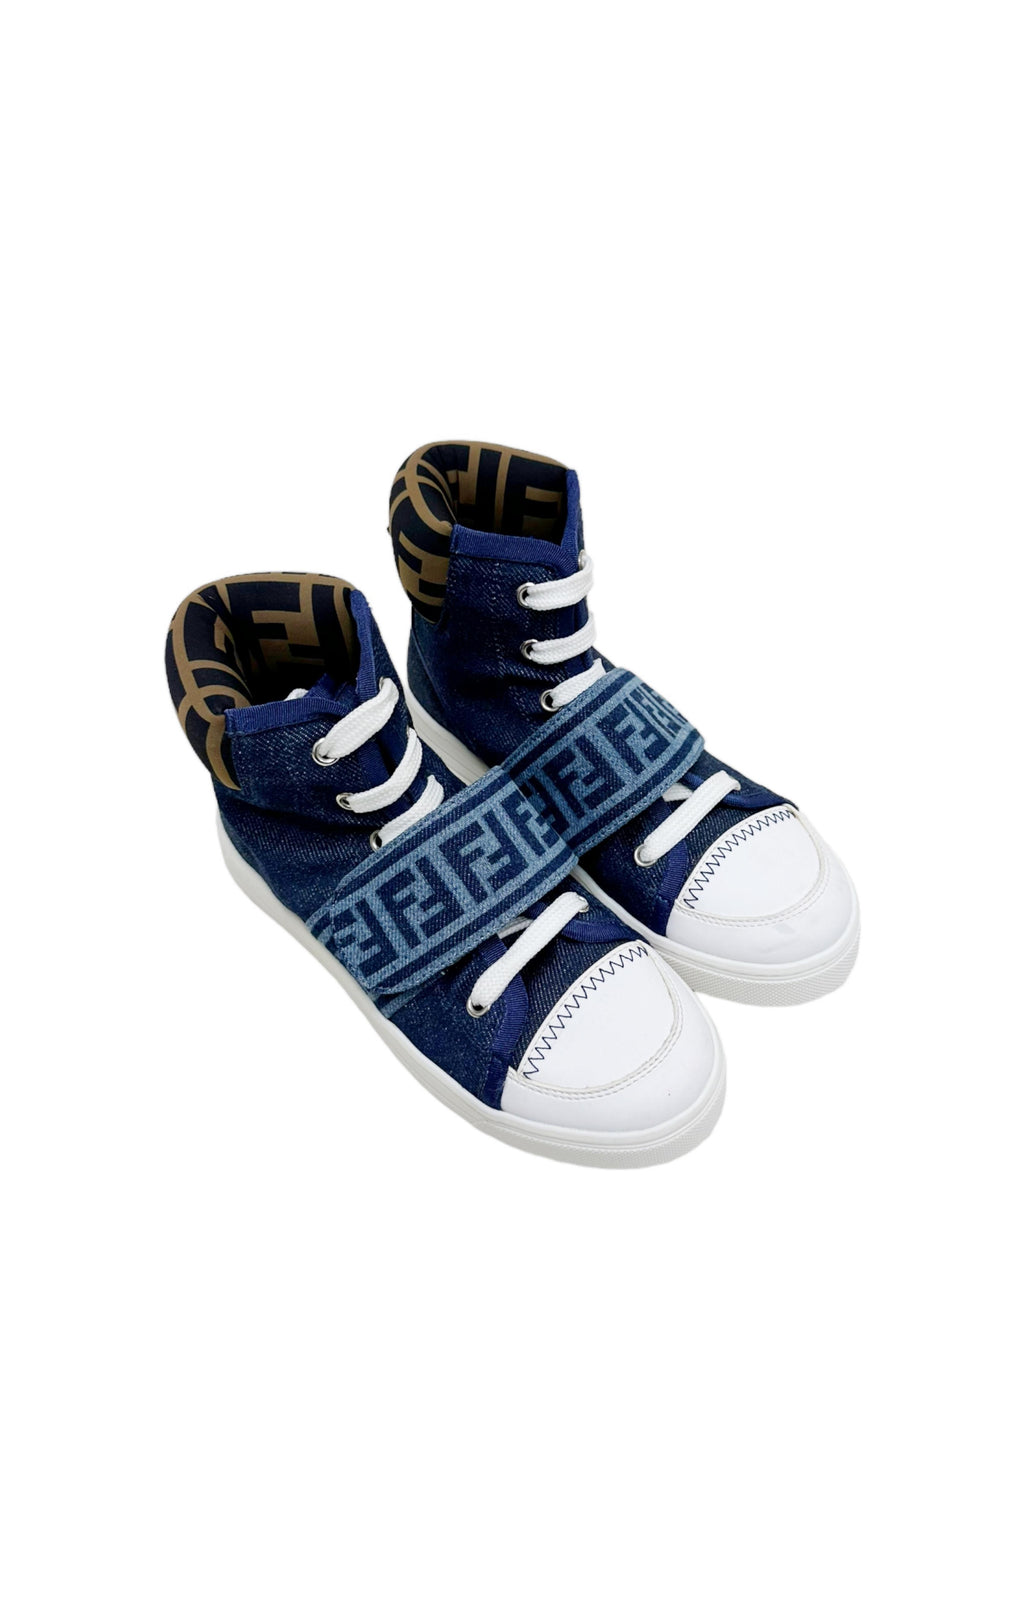 FENDI (RARE) Sneakers Size: No size tags, fit like Toddler US 13.5